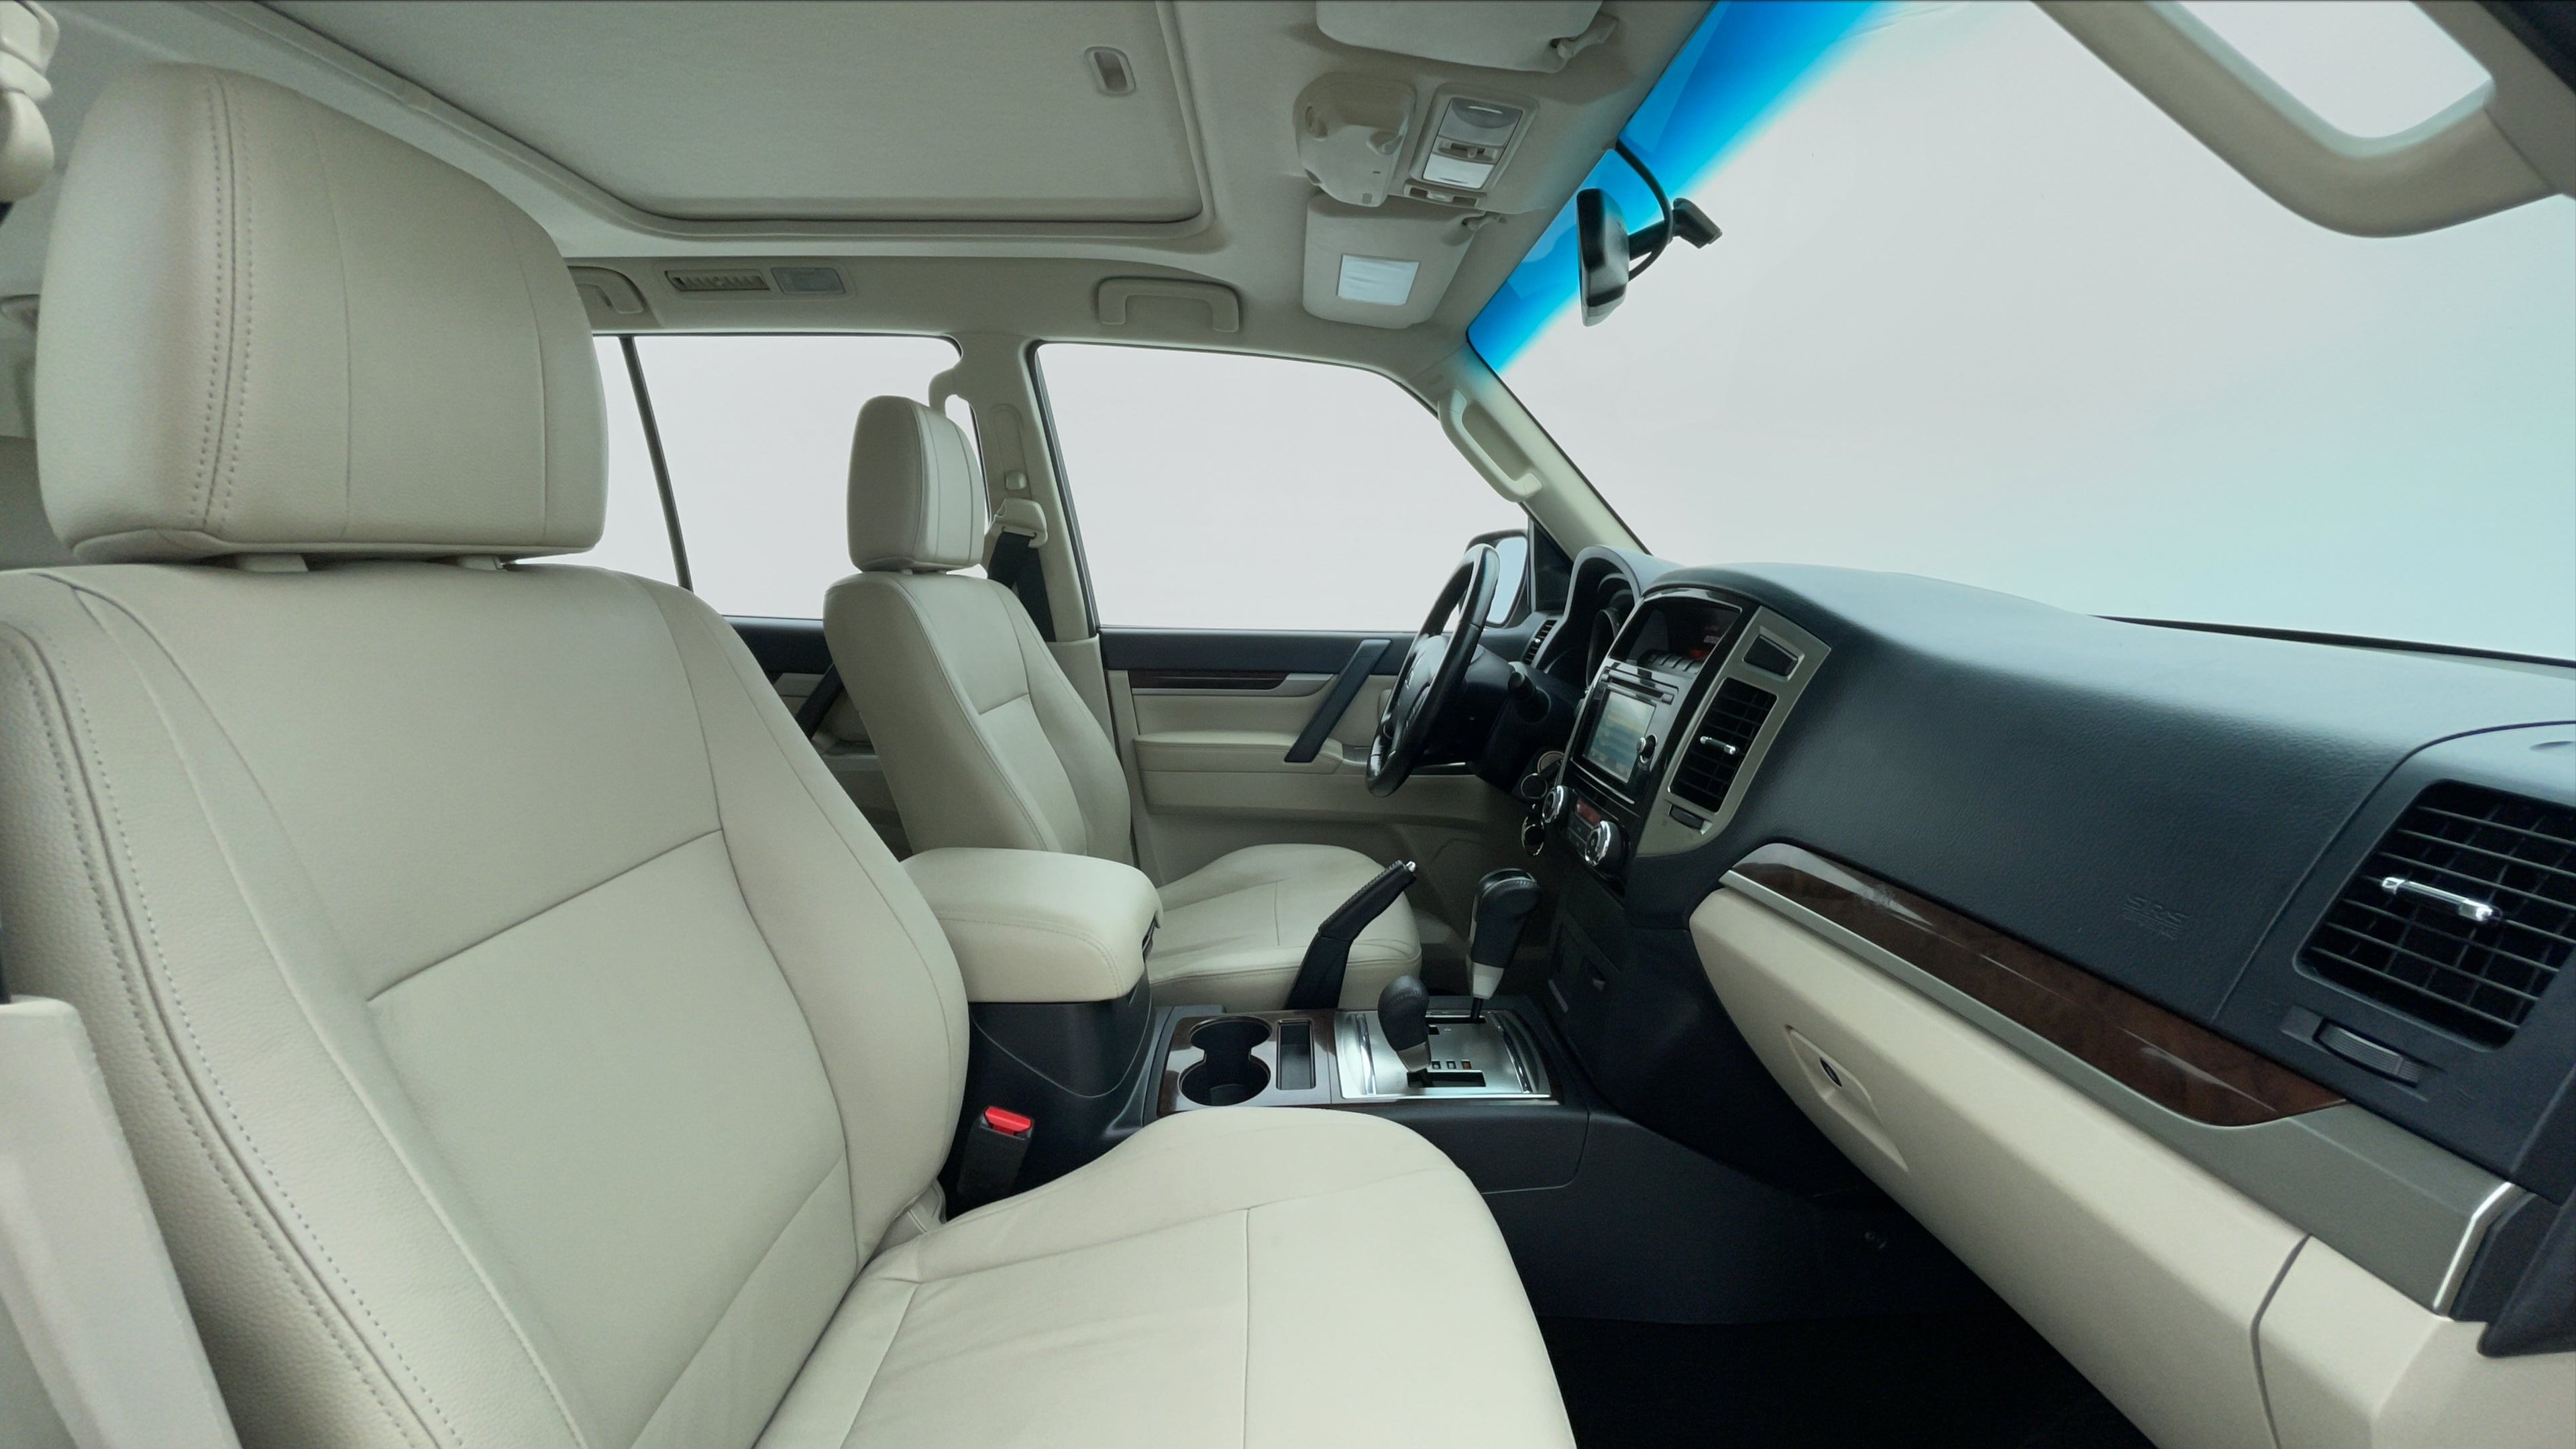 Mitsubishi Pajero-Right Side Front Door Cabin View